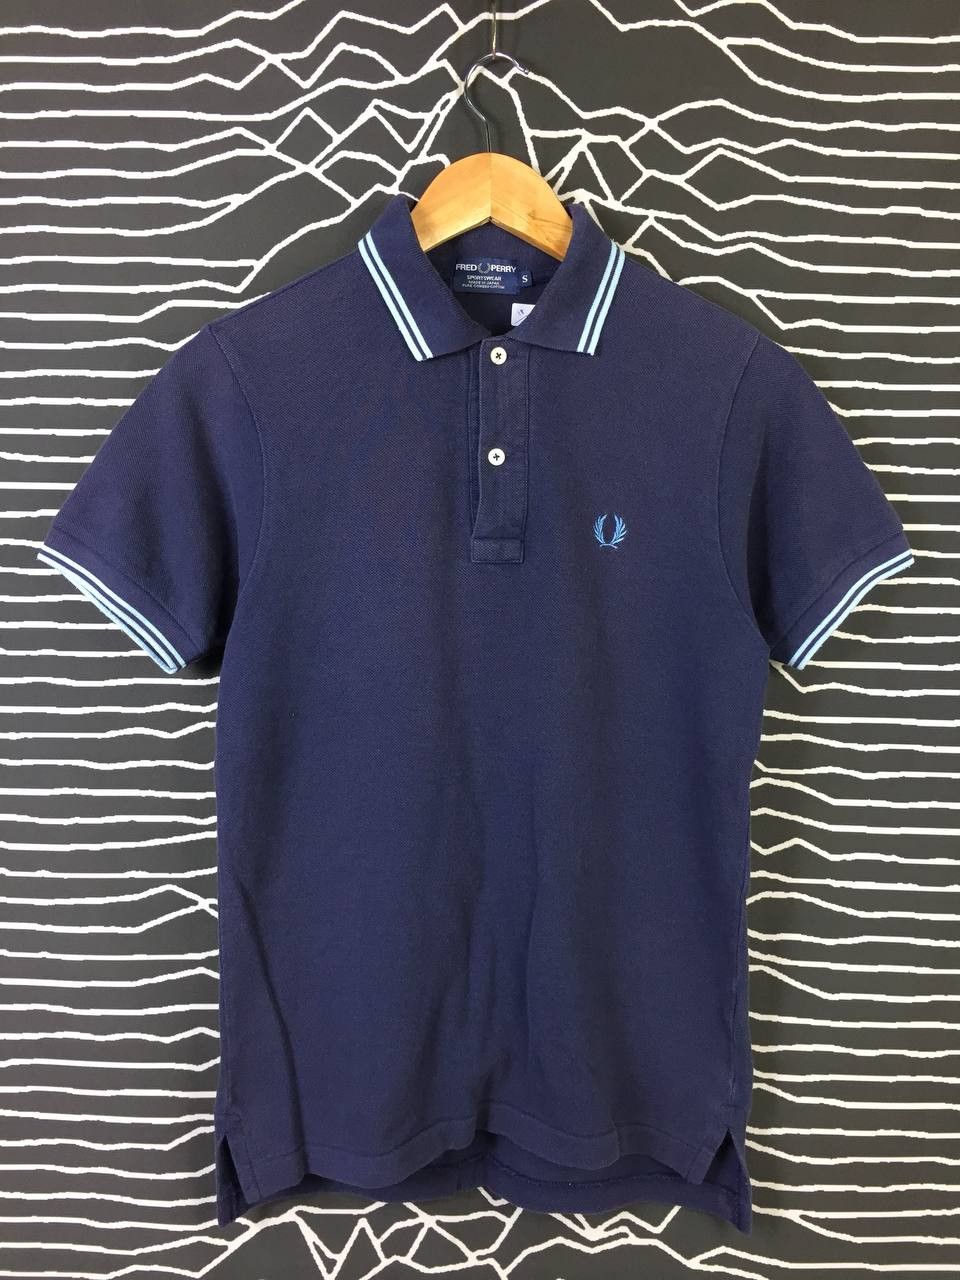 Vintage Vtg Fred Perry Sportswear Twin Tipped Polo Tee Size US S / EU 44-46 / 1 - 2 Preview